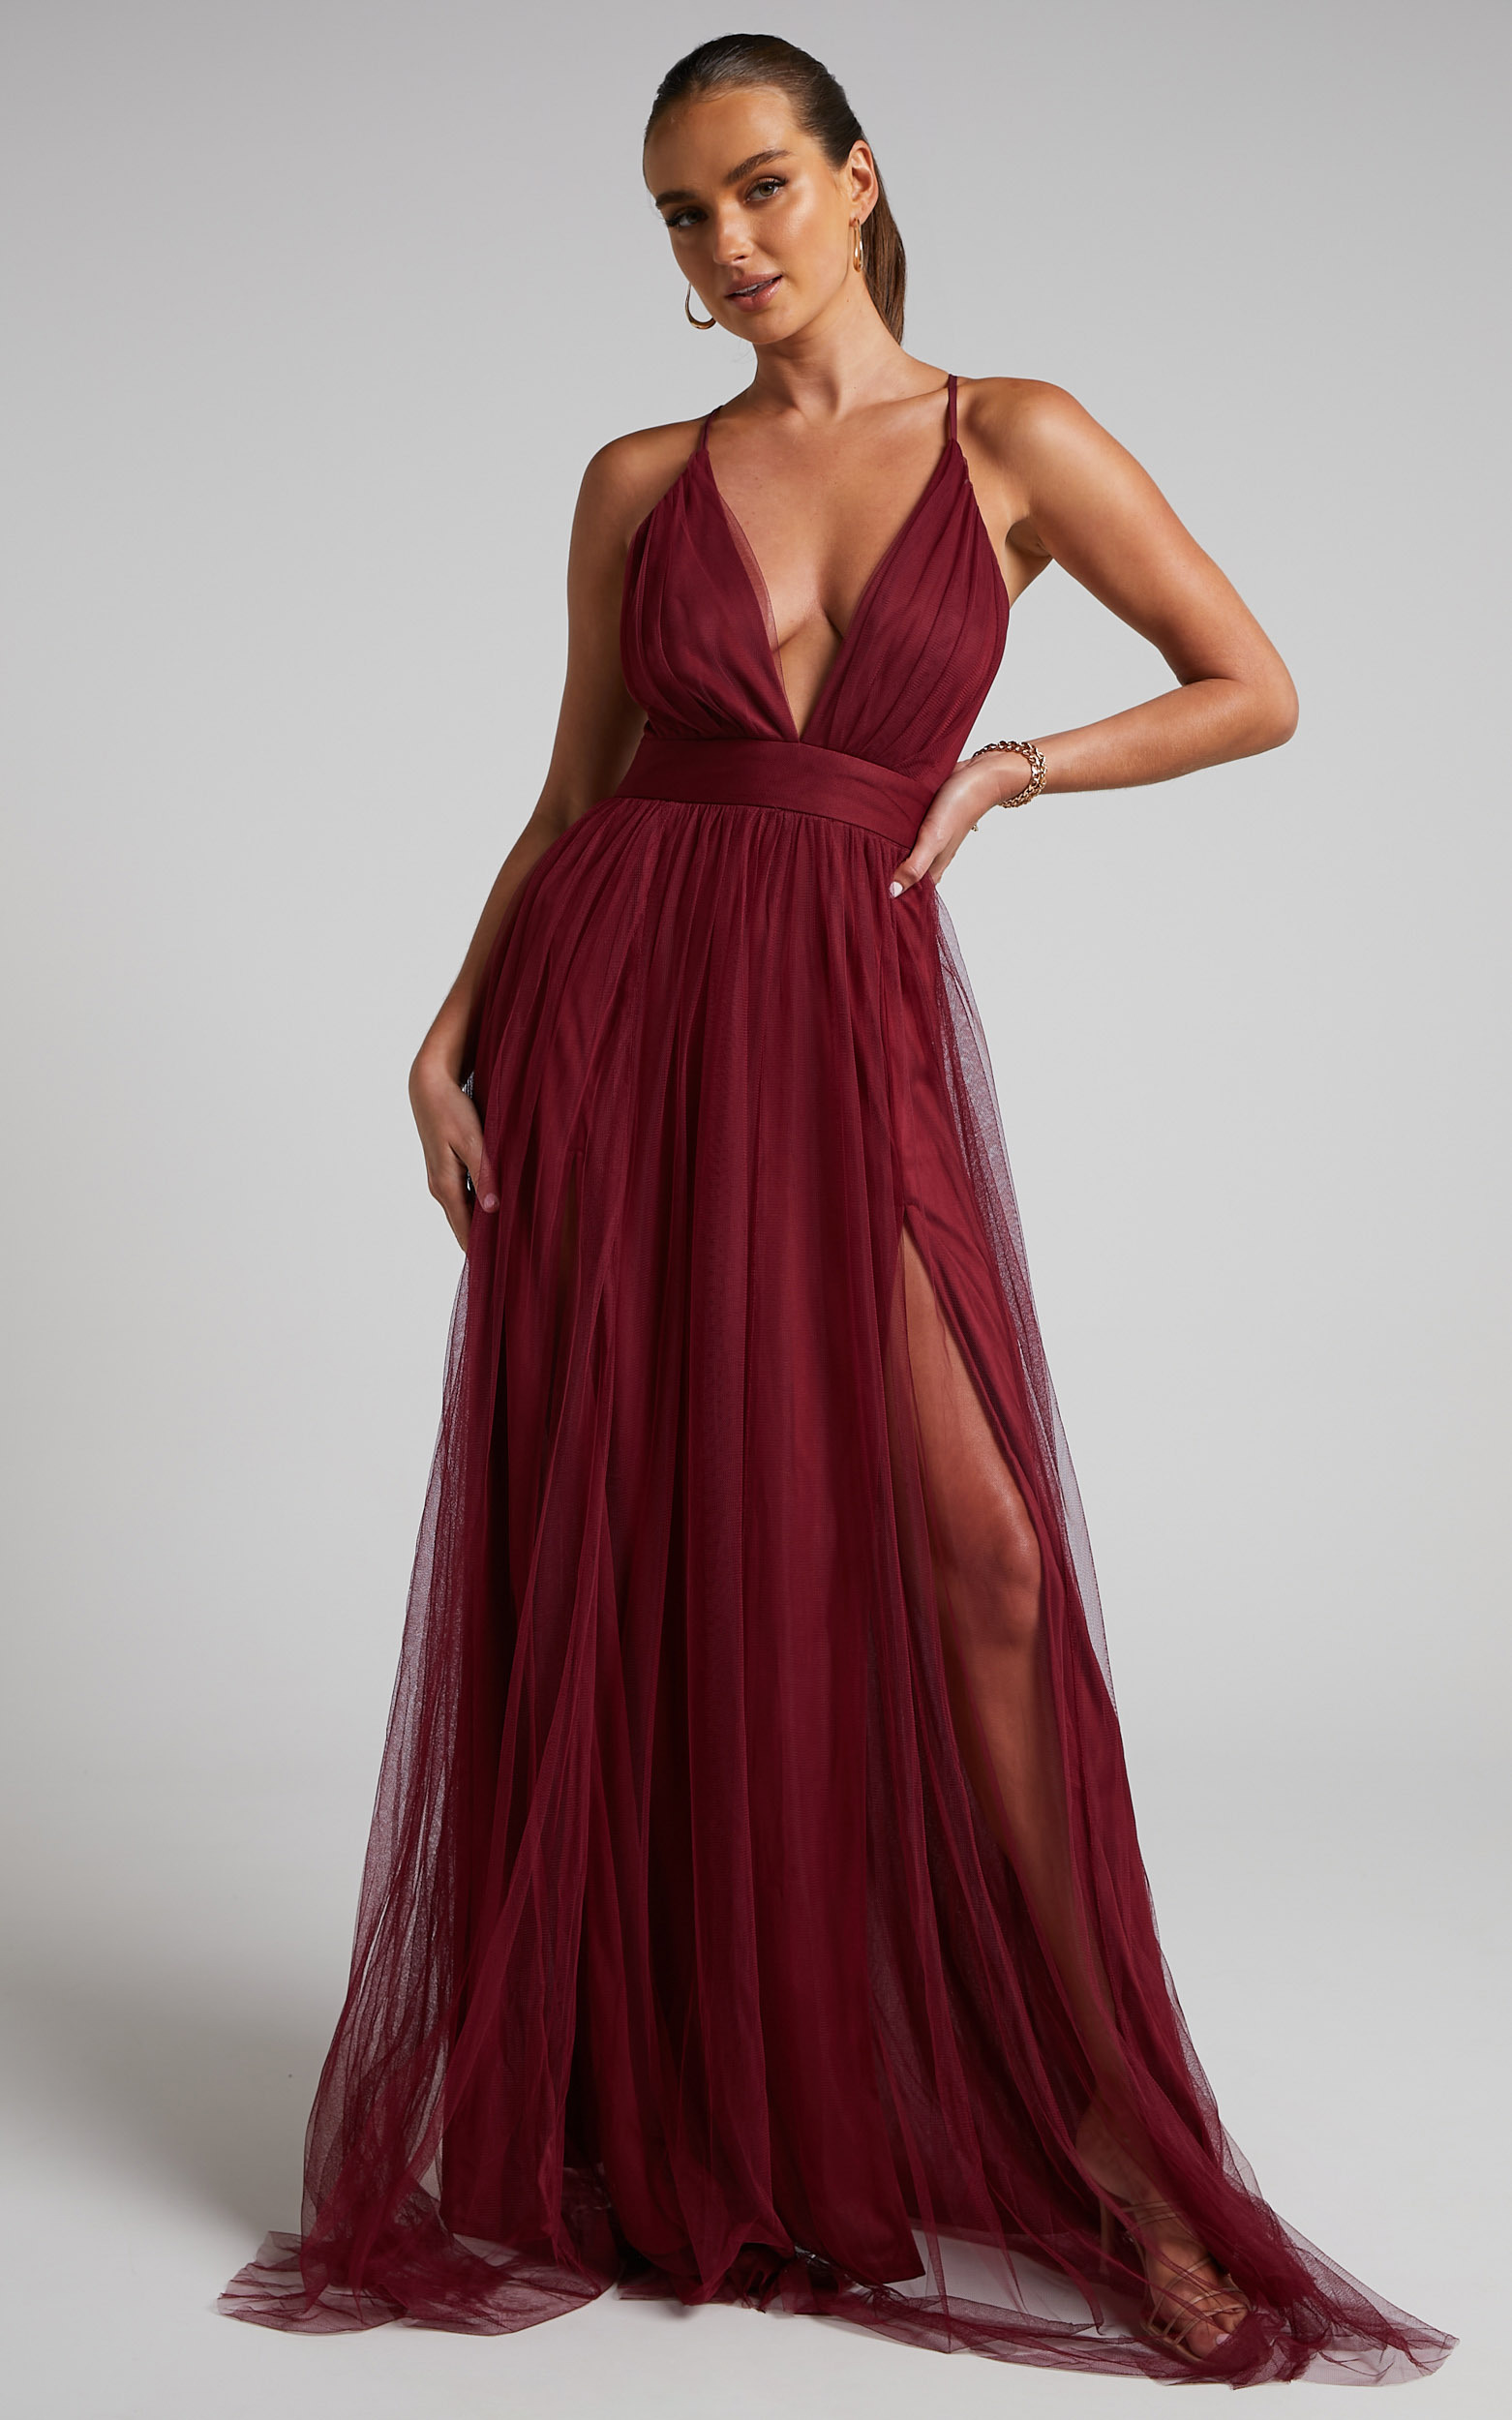 Celebrate Tonight Maxi Dress - Plunge Neck Tulle Dress in Wine - L, WNE3, hi-res image number null